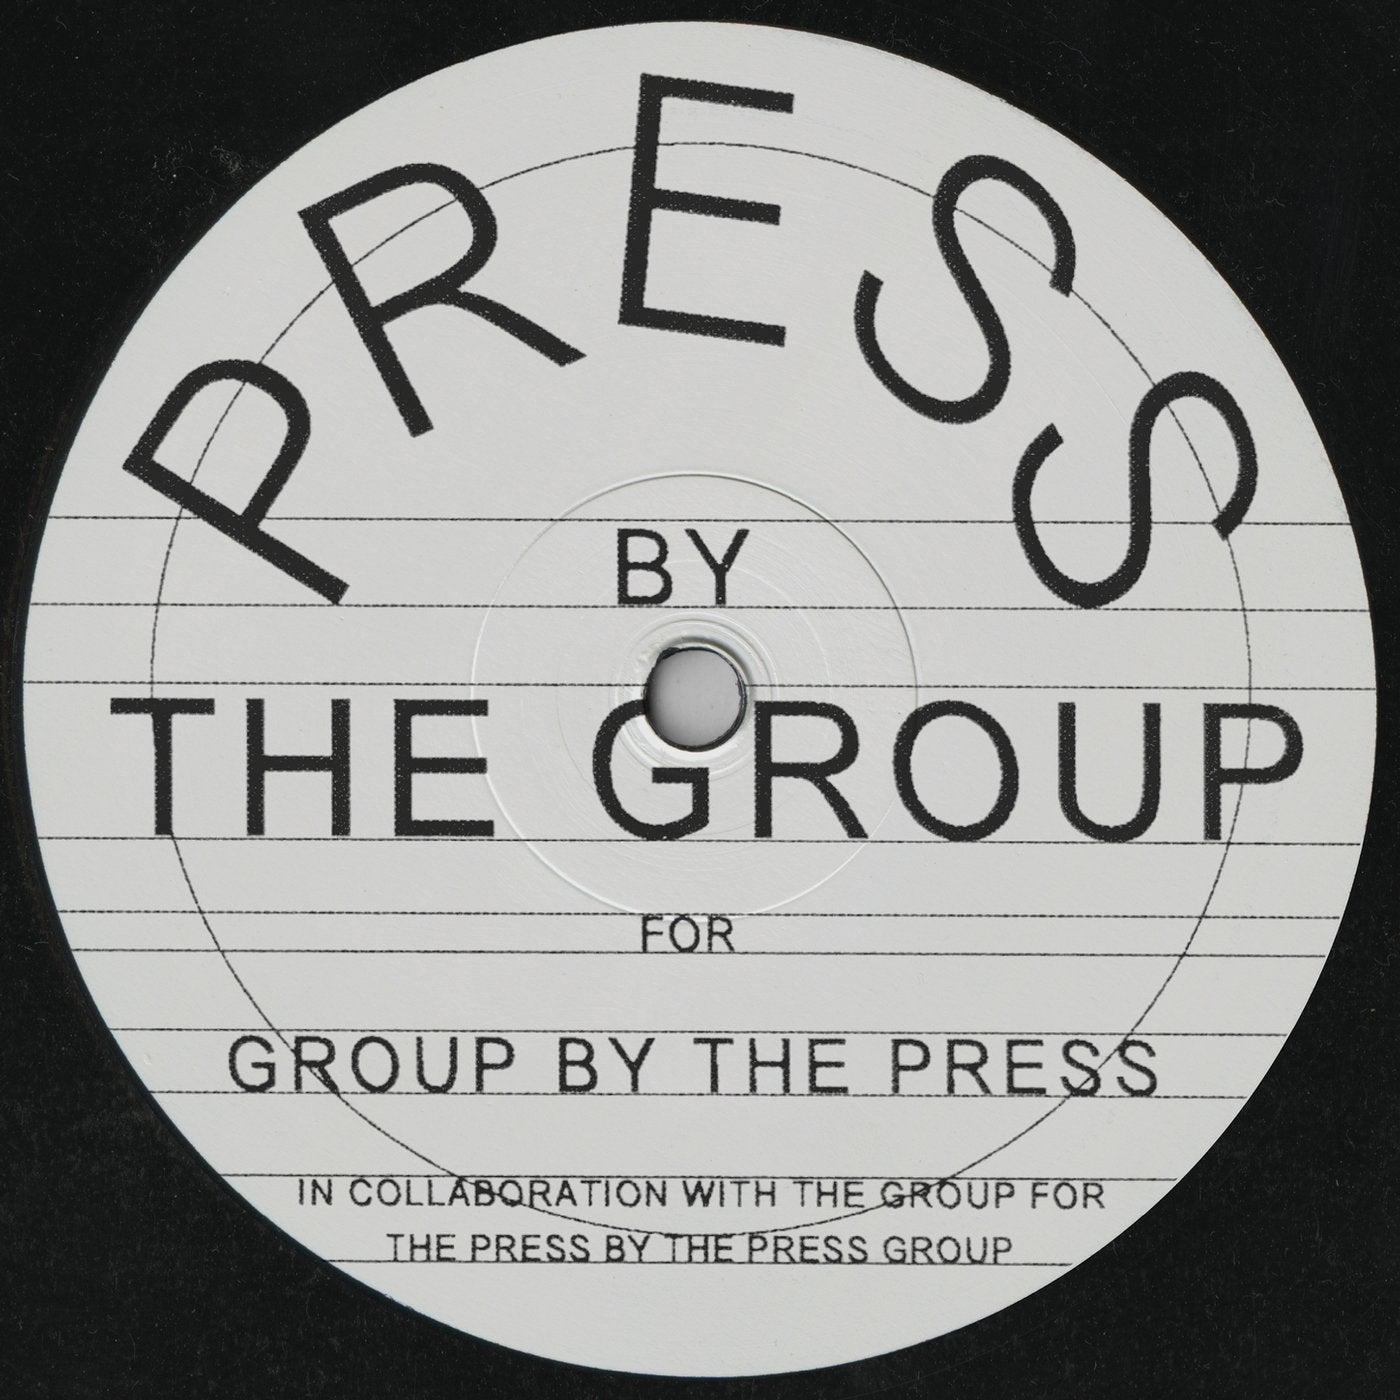 Press by The Group